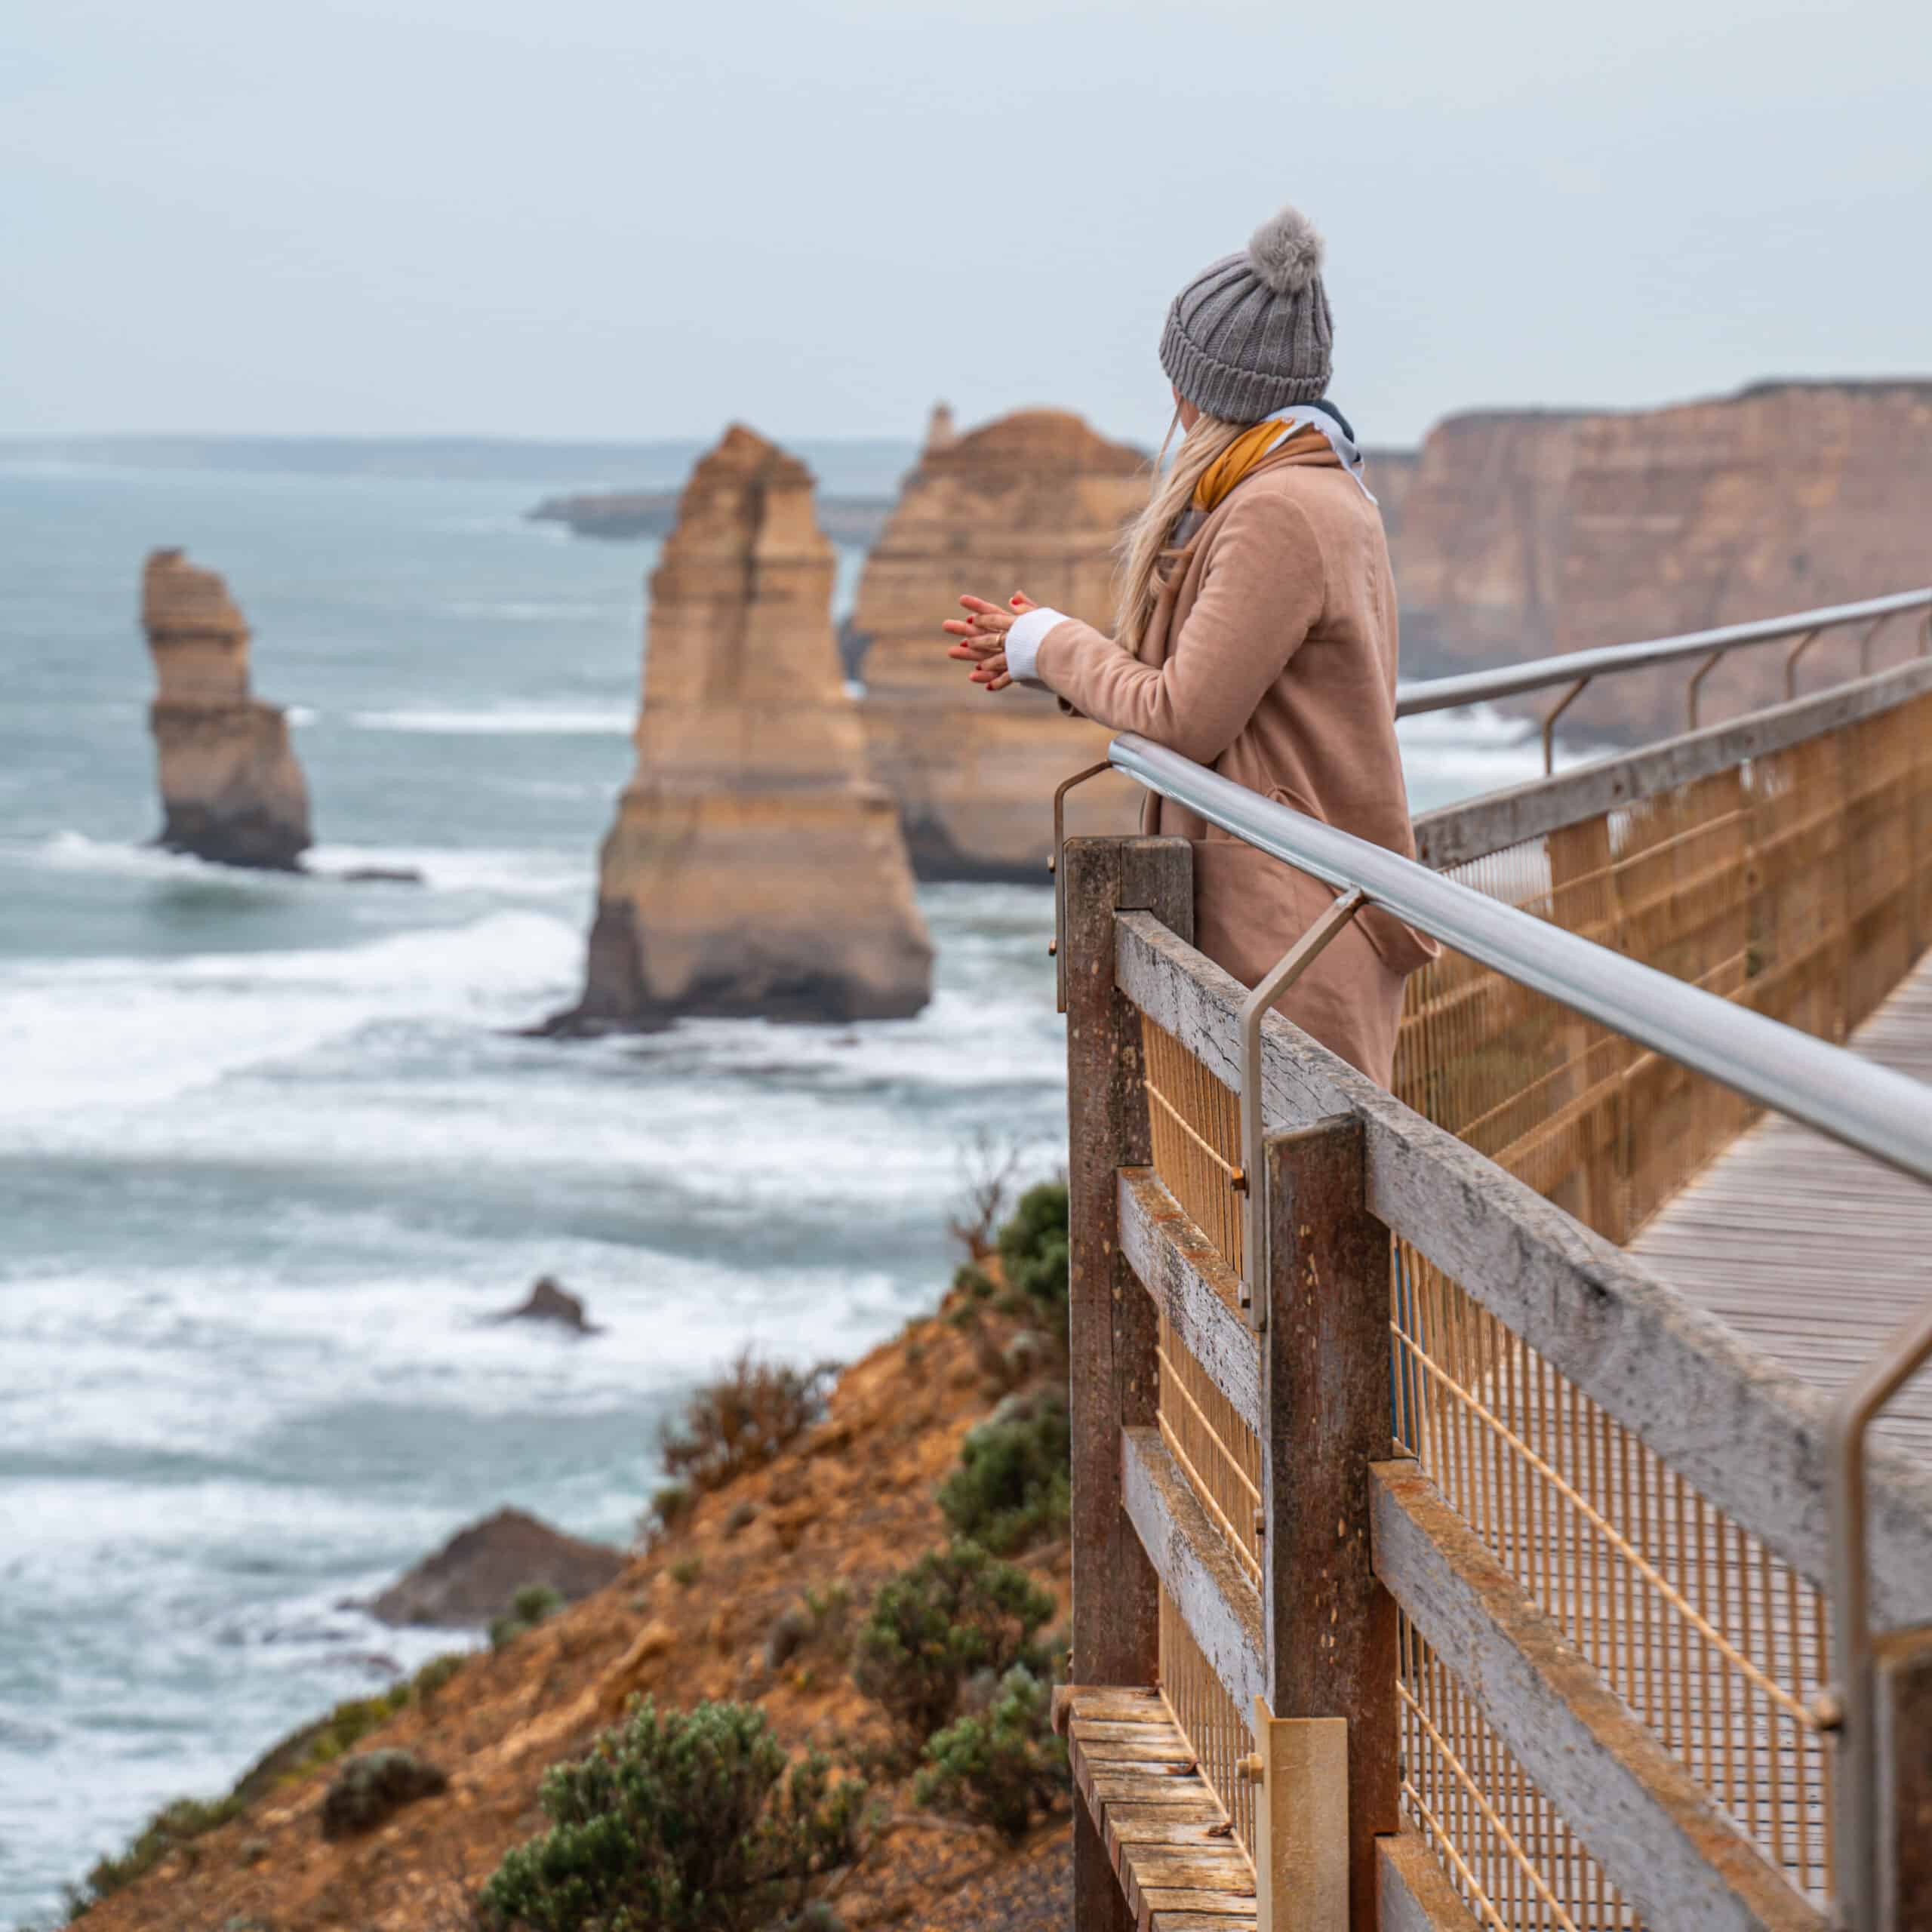 Dani standing on a wooden platform overlooking the 12 Apostles